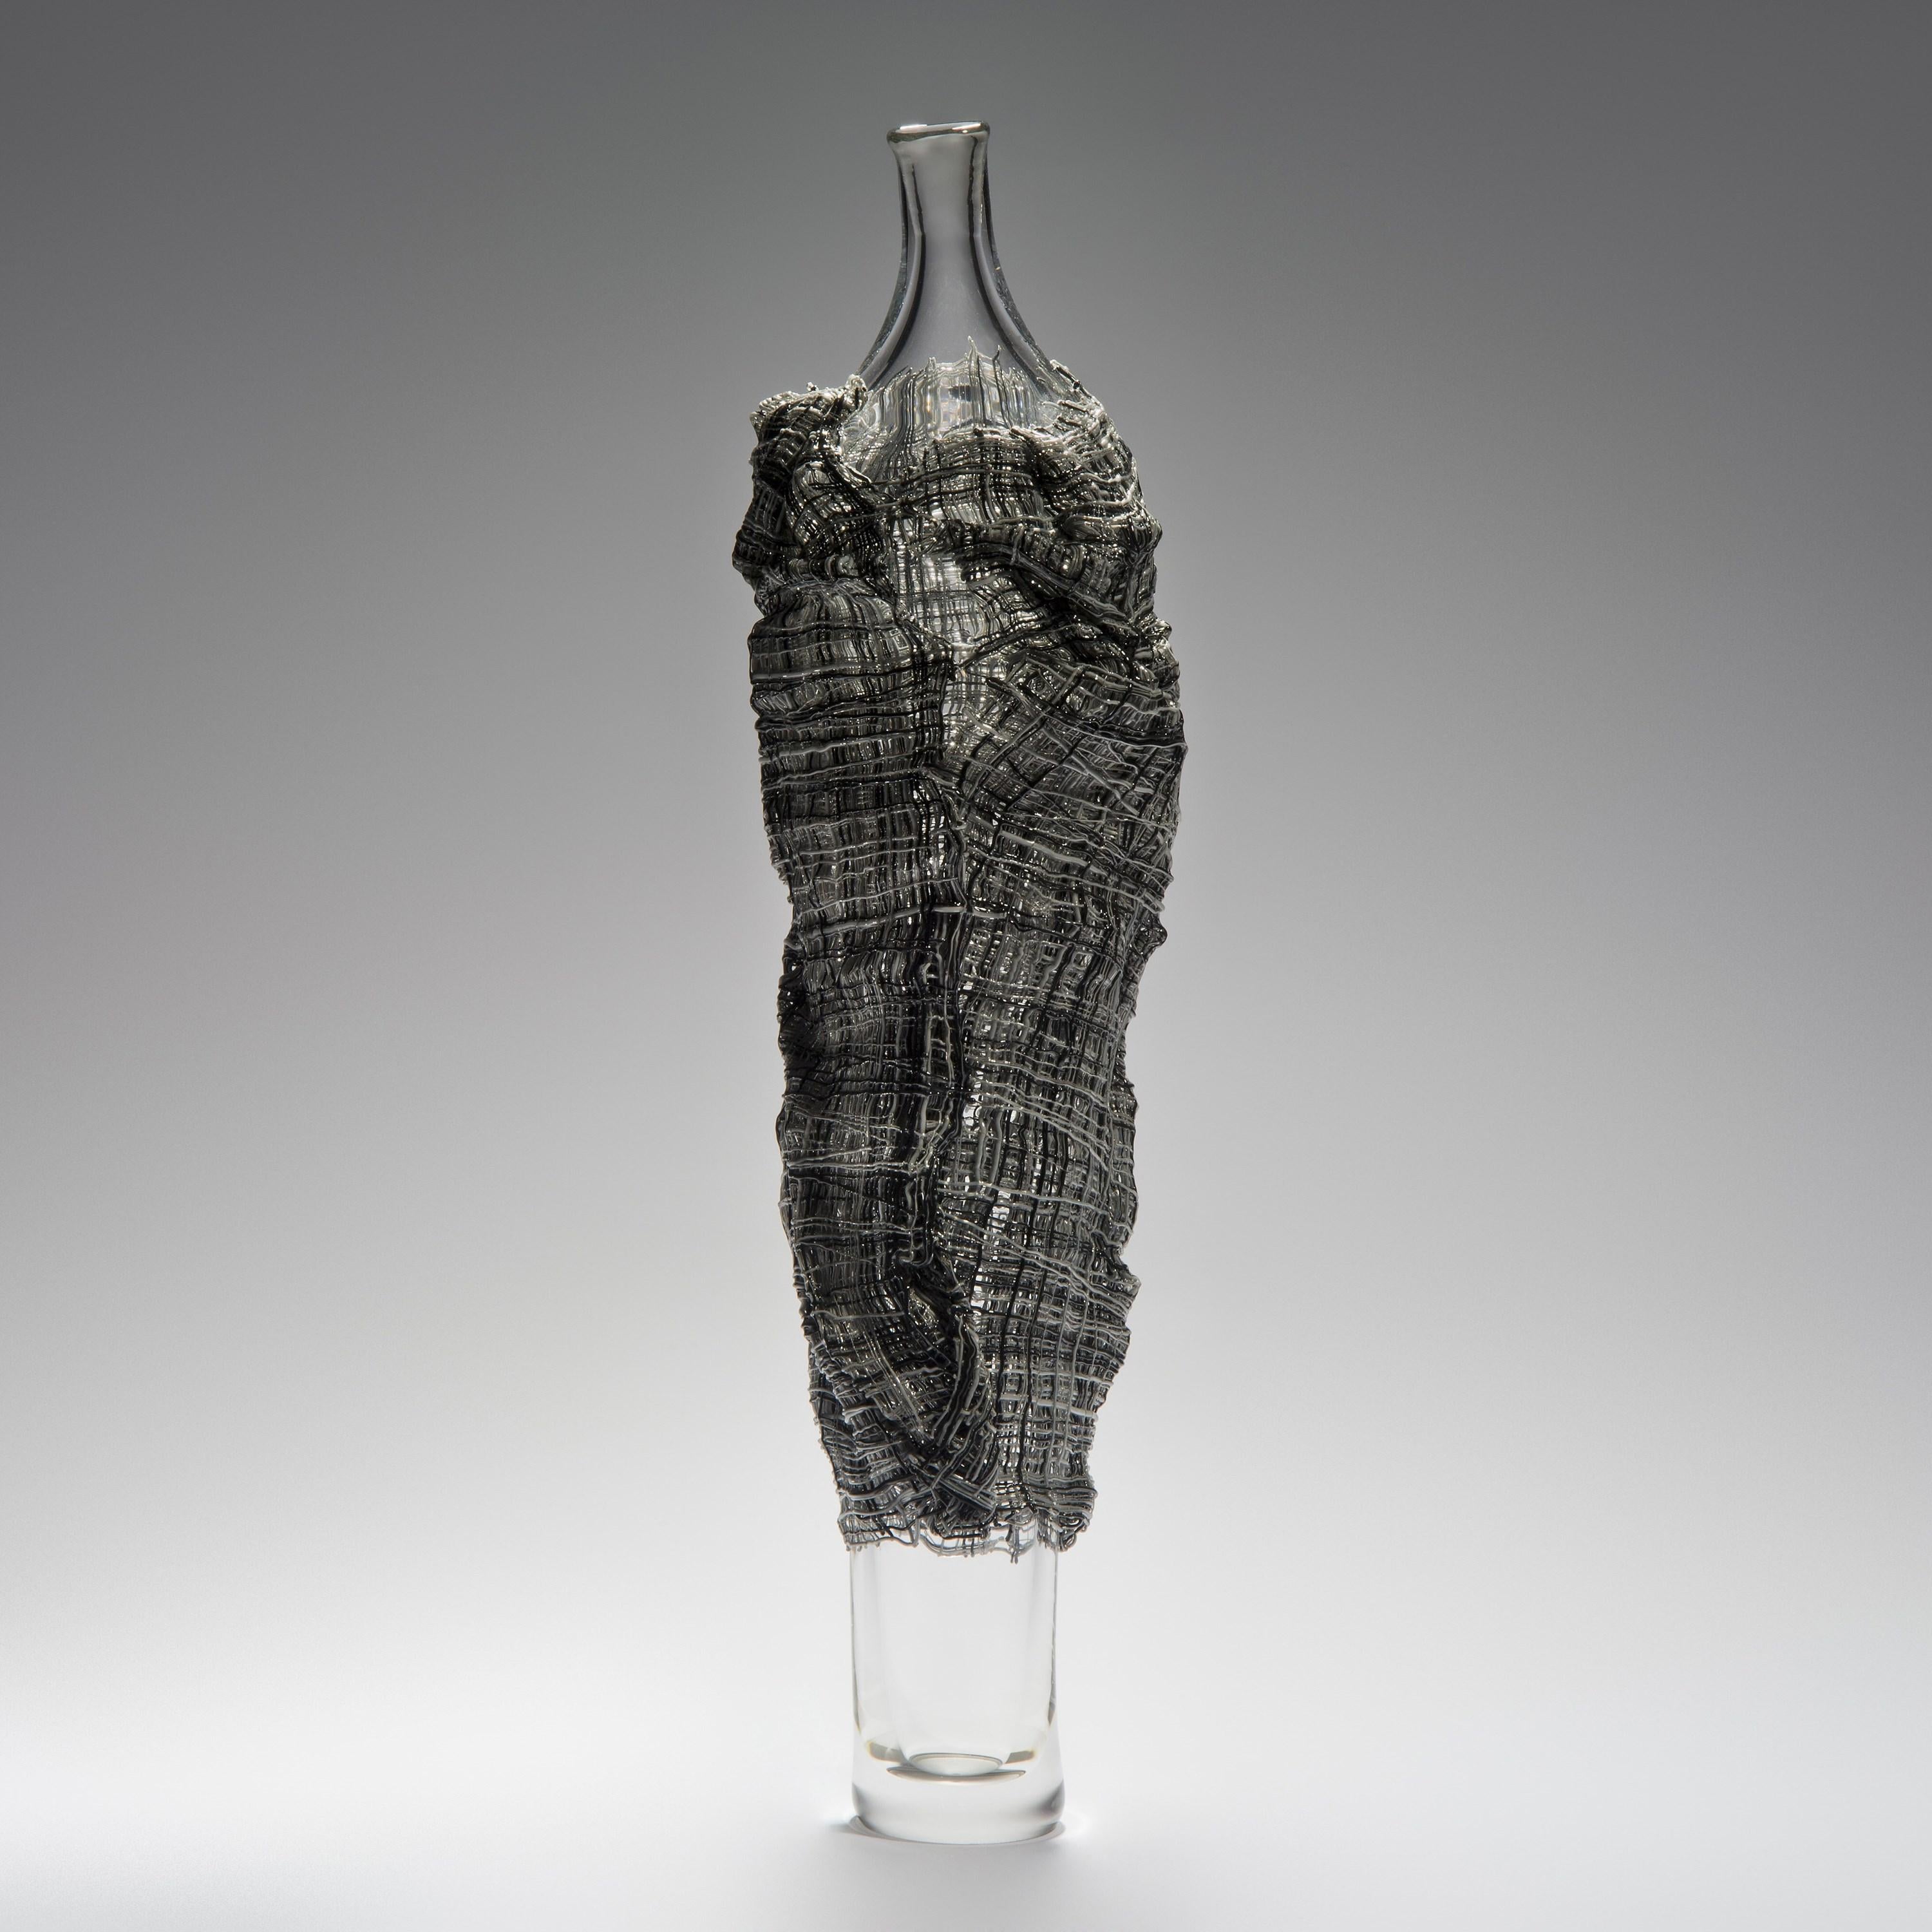 'Electra' is a unique glass sculpture by the British artist Cathryn Shilling. The interior figure is free-blown glass which is wrapped in kiln-formed glass cane 'fabric' which is applied hot. With her Cloaked Collection, Shilling takes mythical